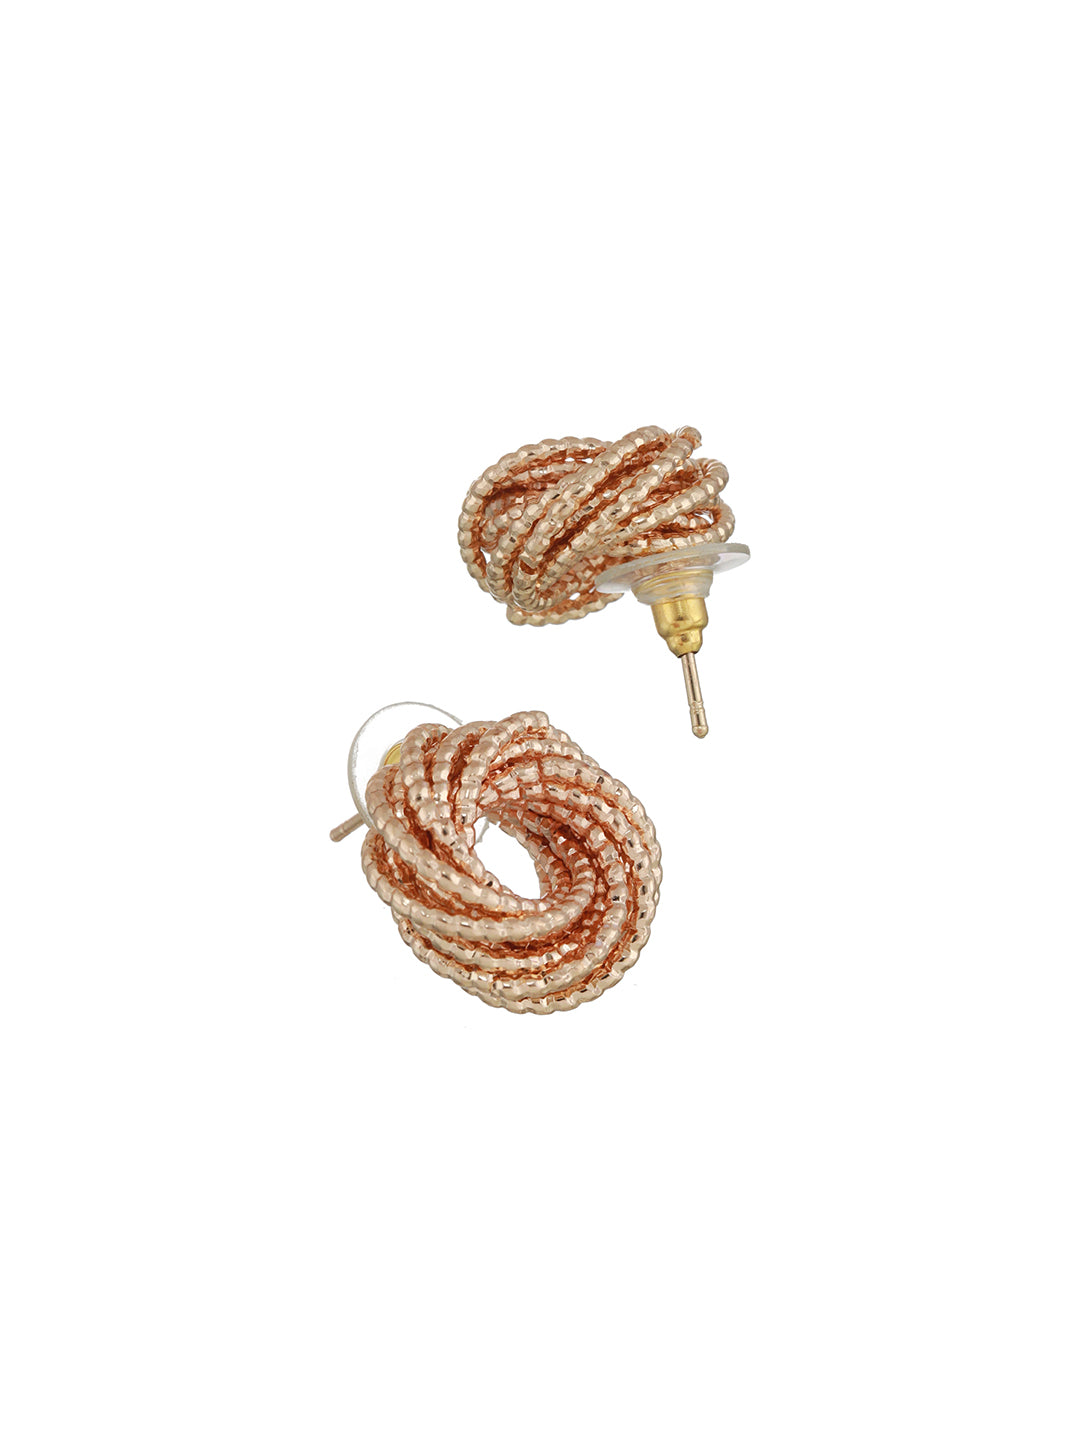 Textured Whirled Wires Rose Gold-Plated Earrings